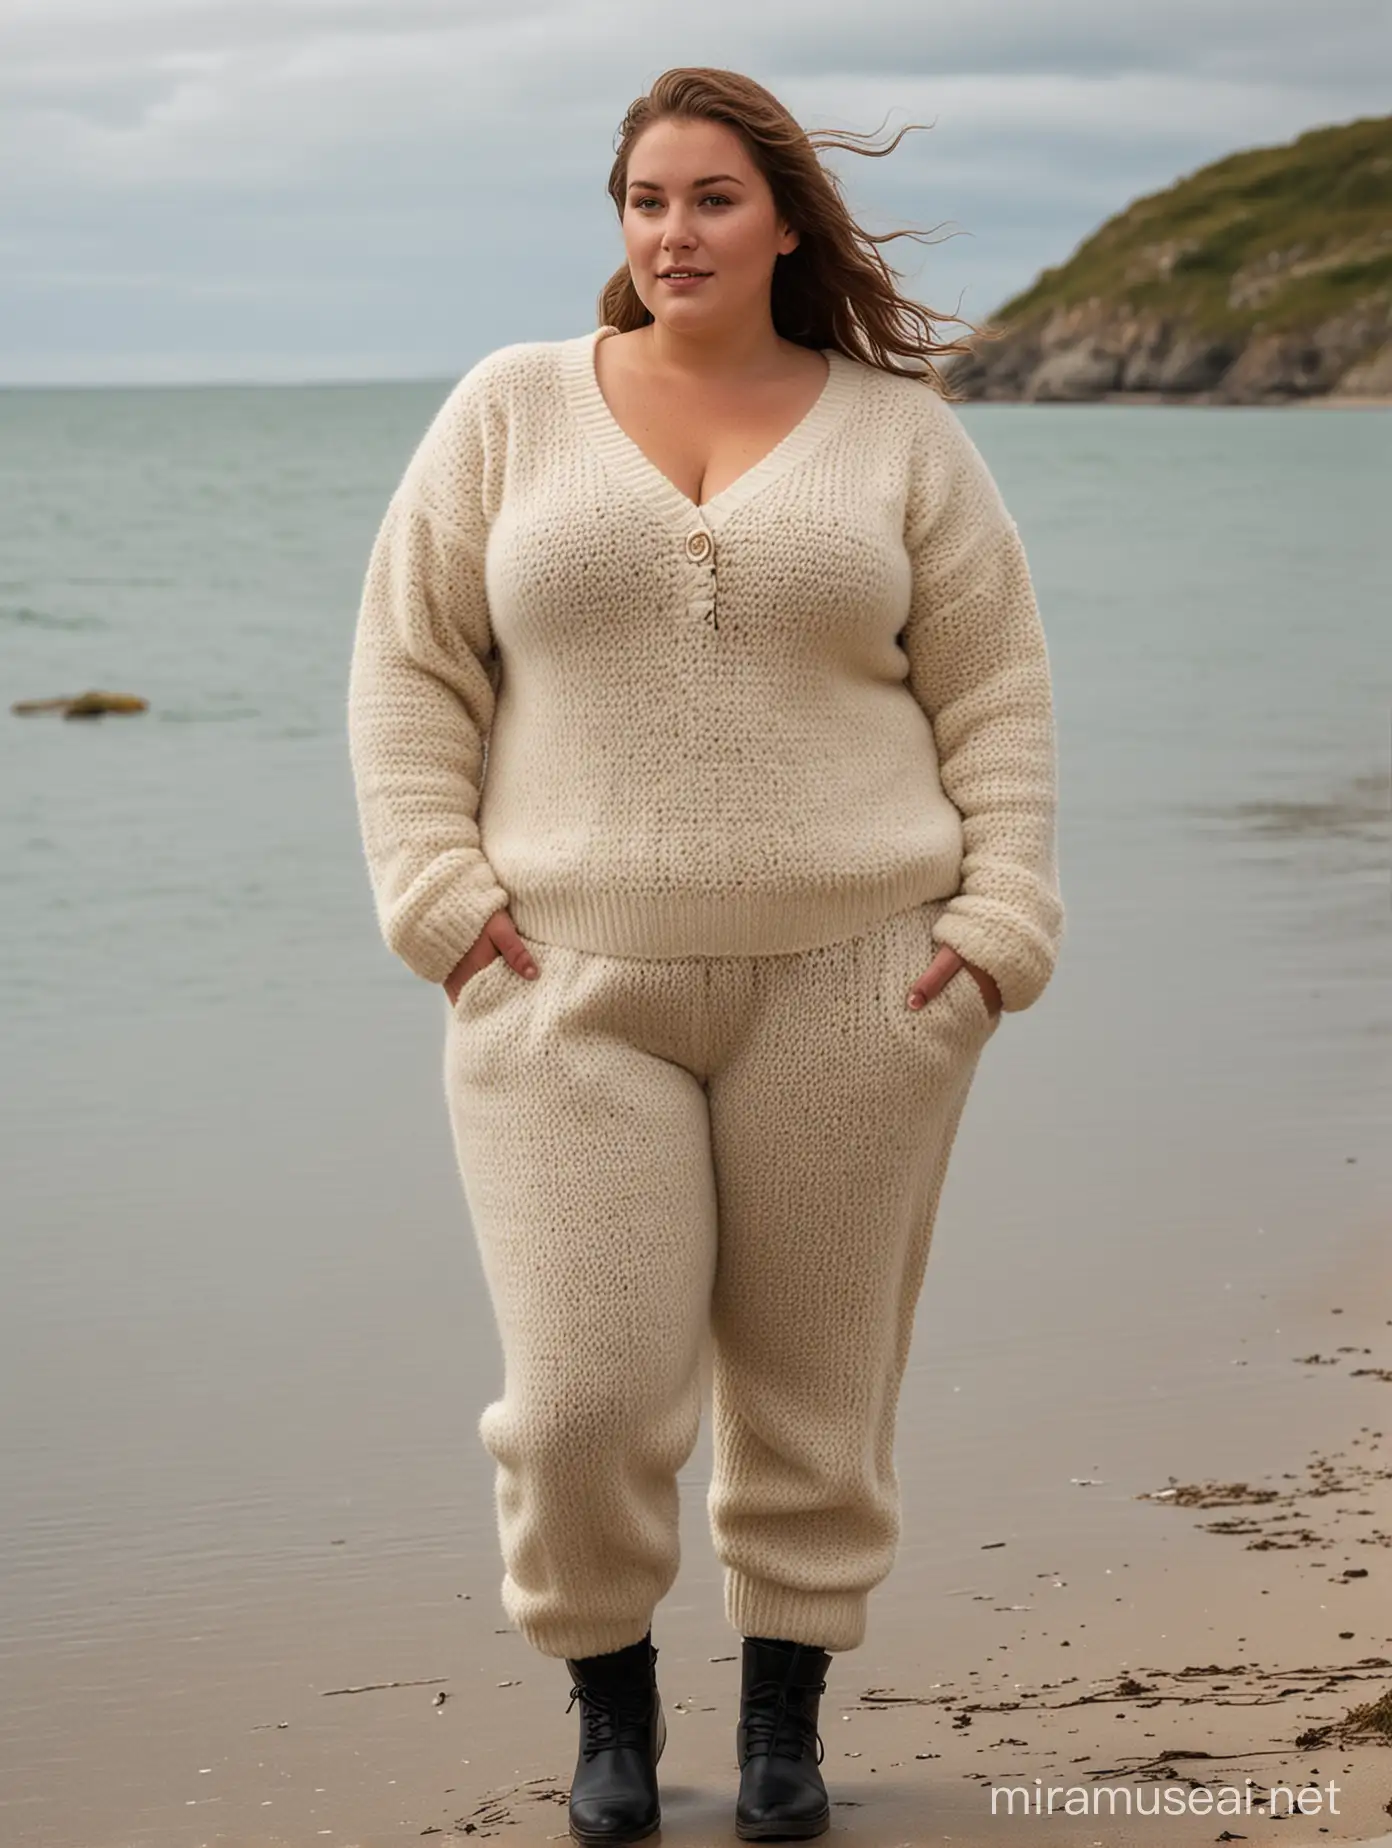 curvy, plus-size girl with supersize fat boobs, wearing a thick fuzzy heavy norwegian wool sweater and knitted wool pants, standing on a seashore in summer